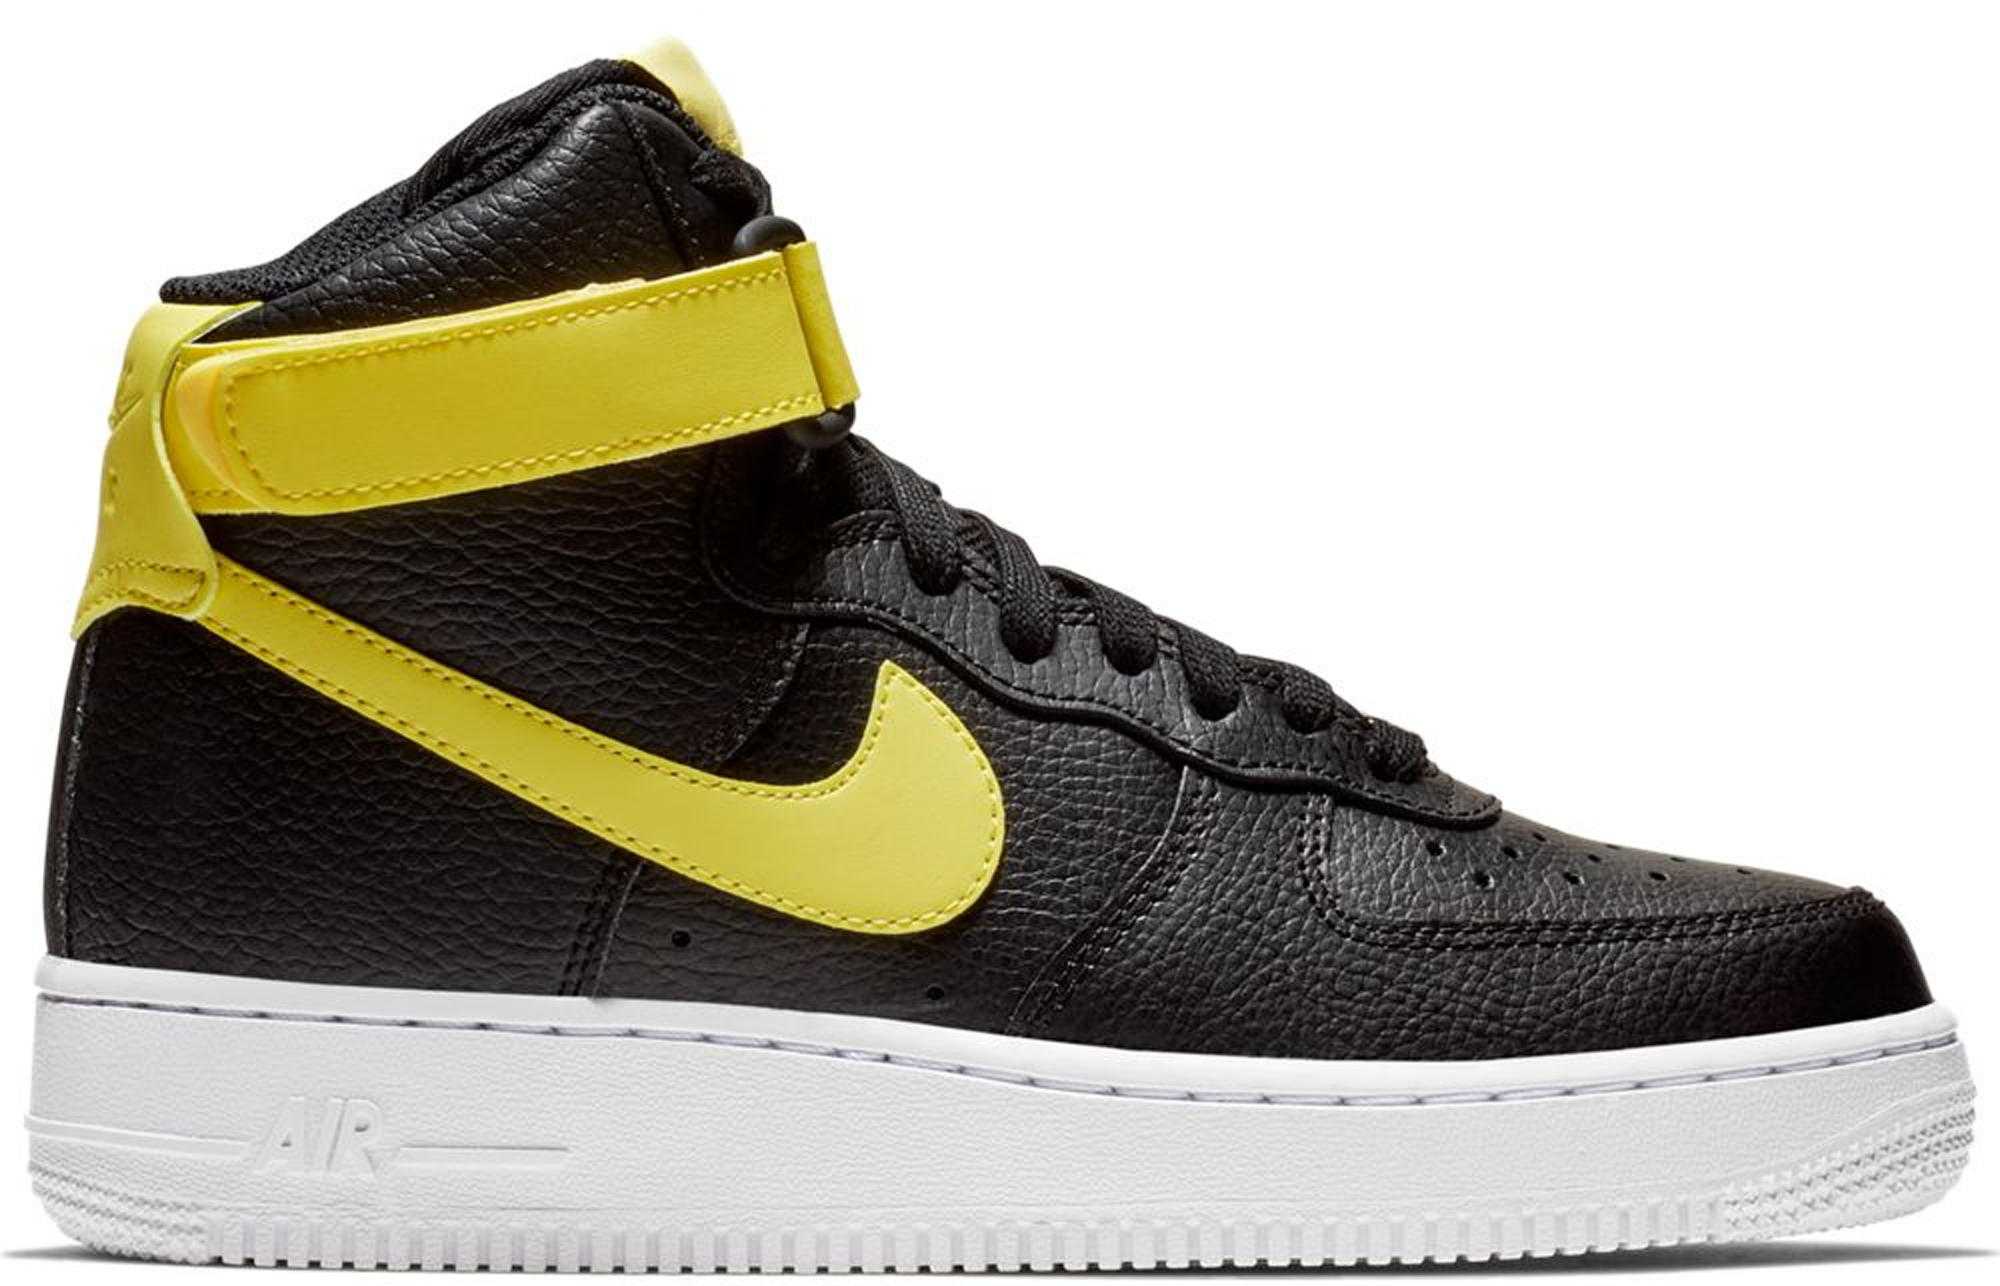 yellow and black air force 1 high